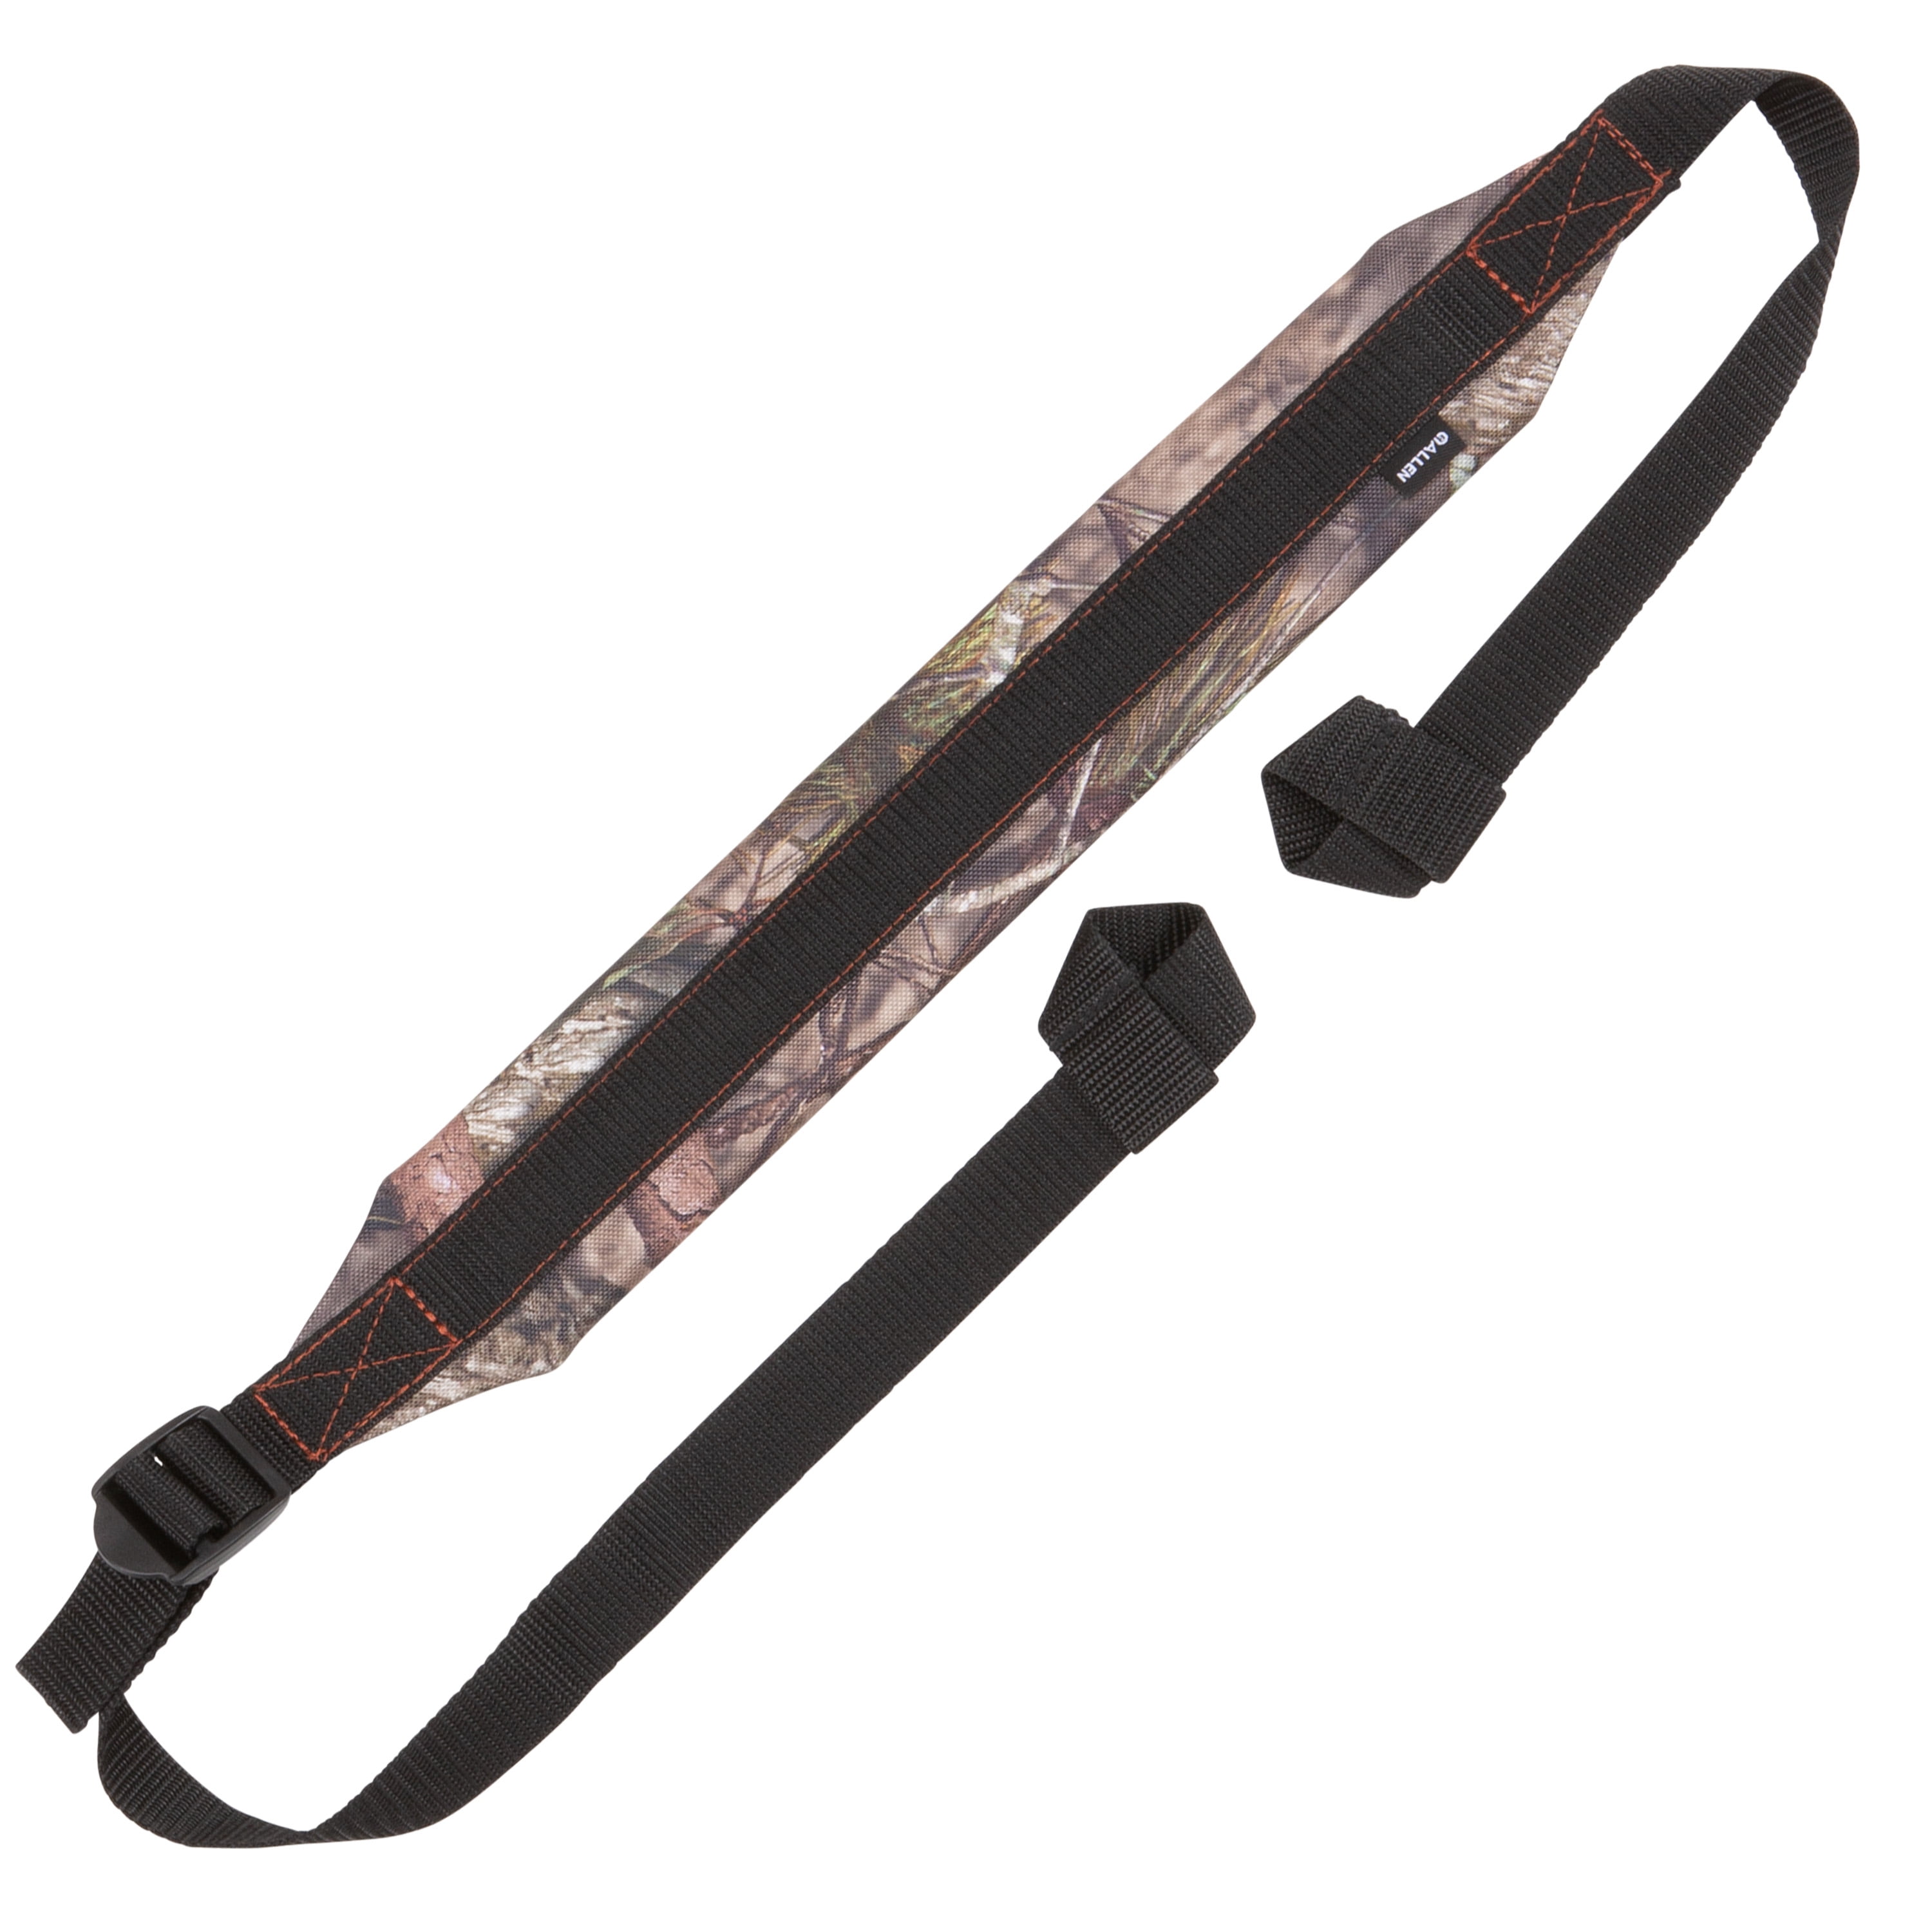 2 Point Black New ALLEN ENDURA Comfy PADDED RIFLE SLING for 1 inch Swivels 